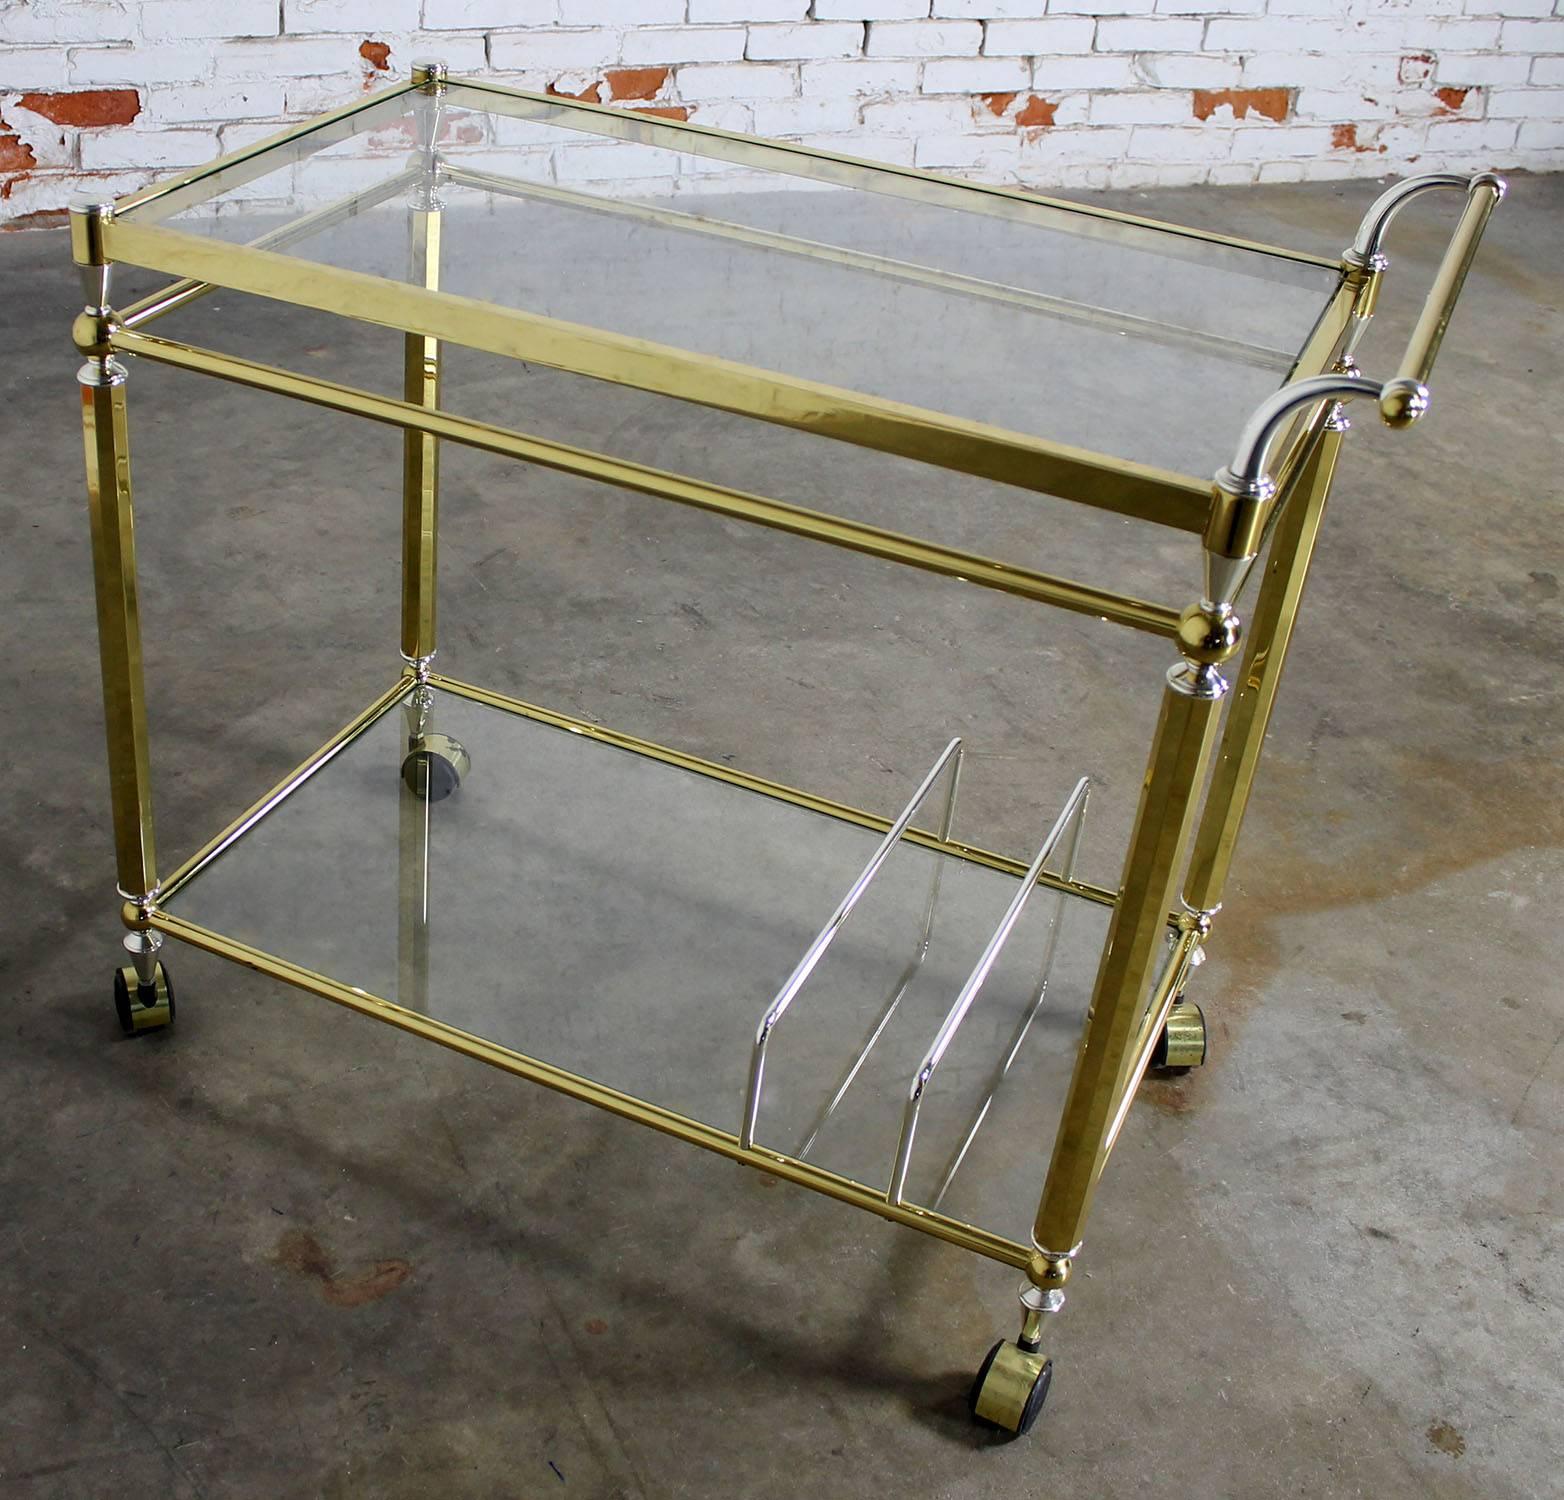 Elegant double-tier brass rolling serving, tea, or bar cart with glass shelves, circa 1970 and in excellent condition.

This is just the right bar cart, tea cart, or serving cart. With its combination of brass, chrome and glass materials and its